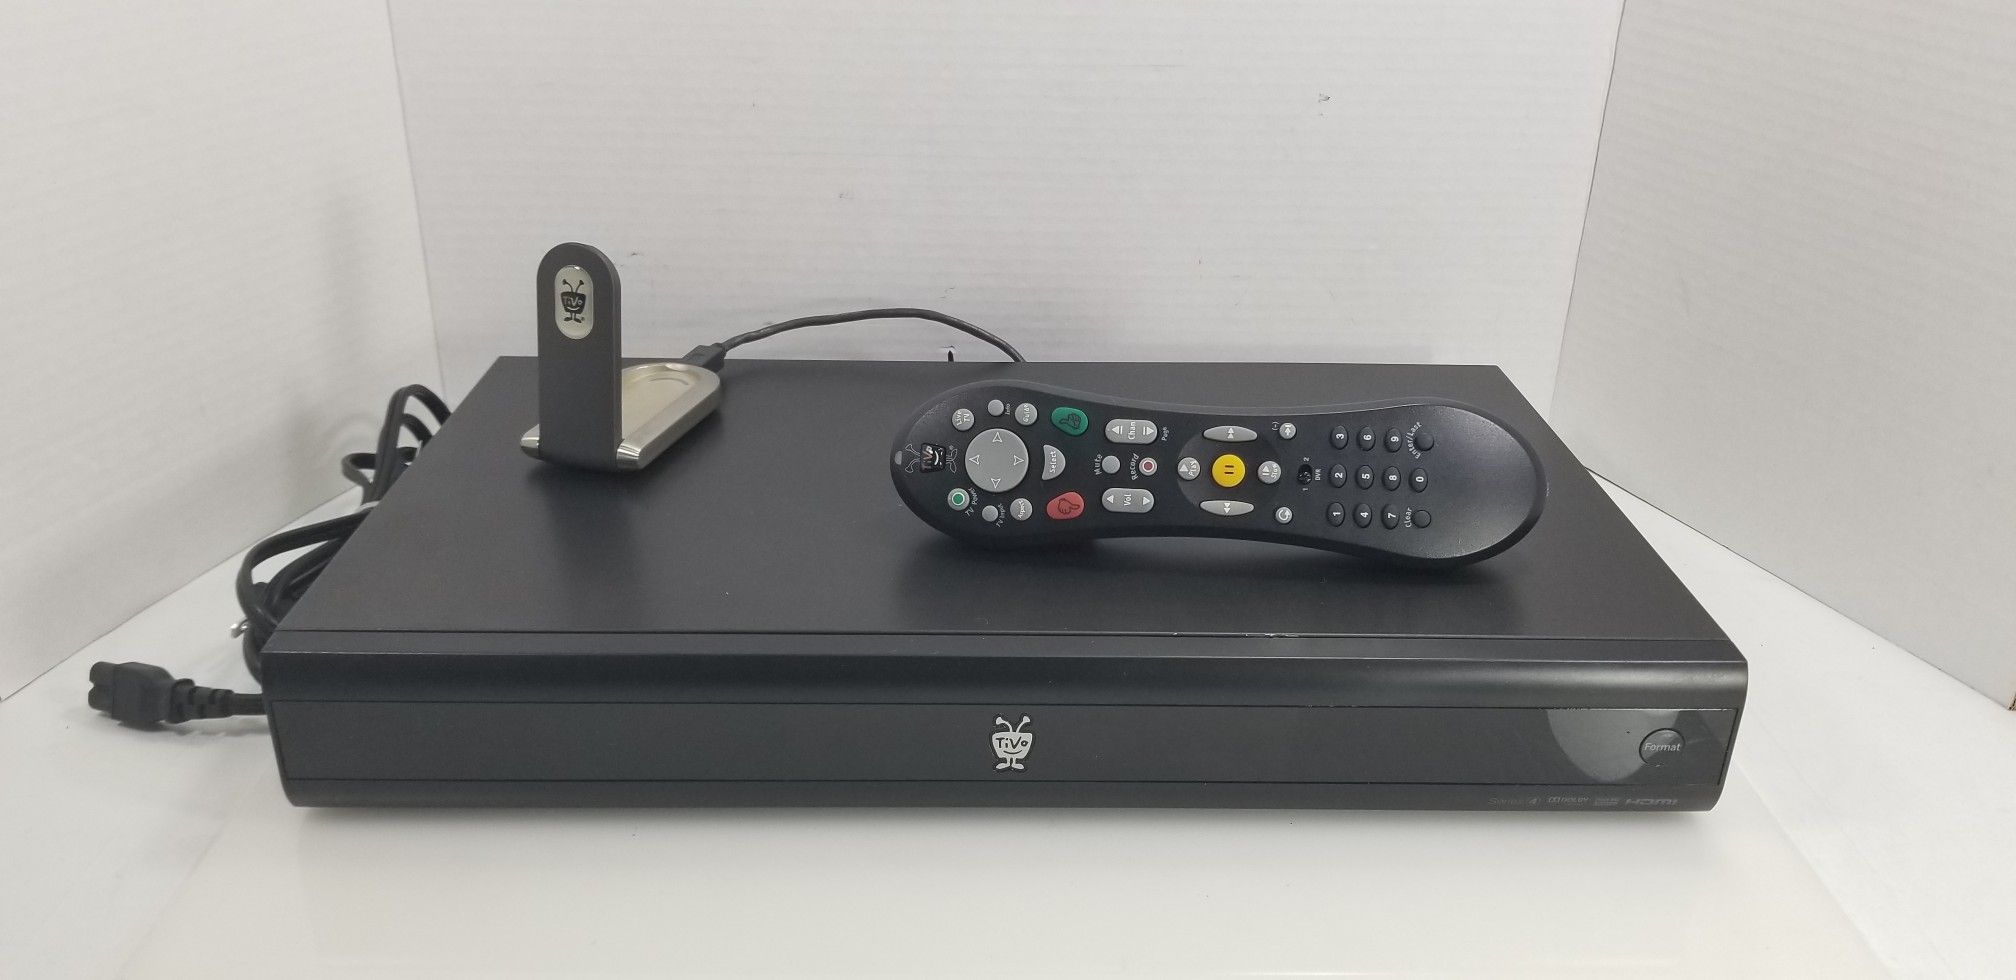 TiVo © Premiere Series 4 TCD746320 45 HD/400 SD Hours + Product Lifetime Service